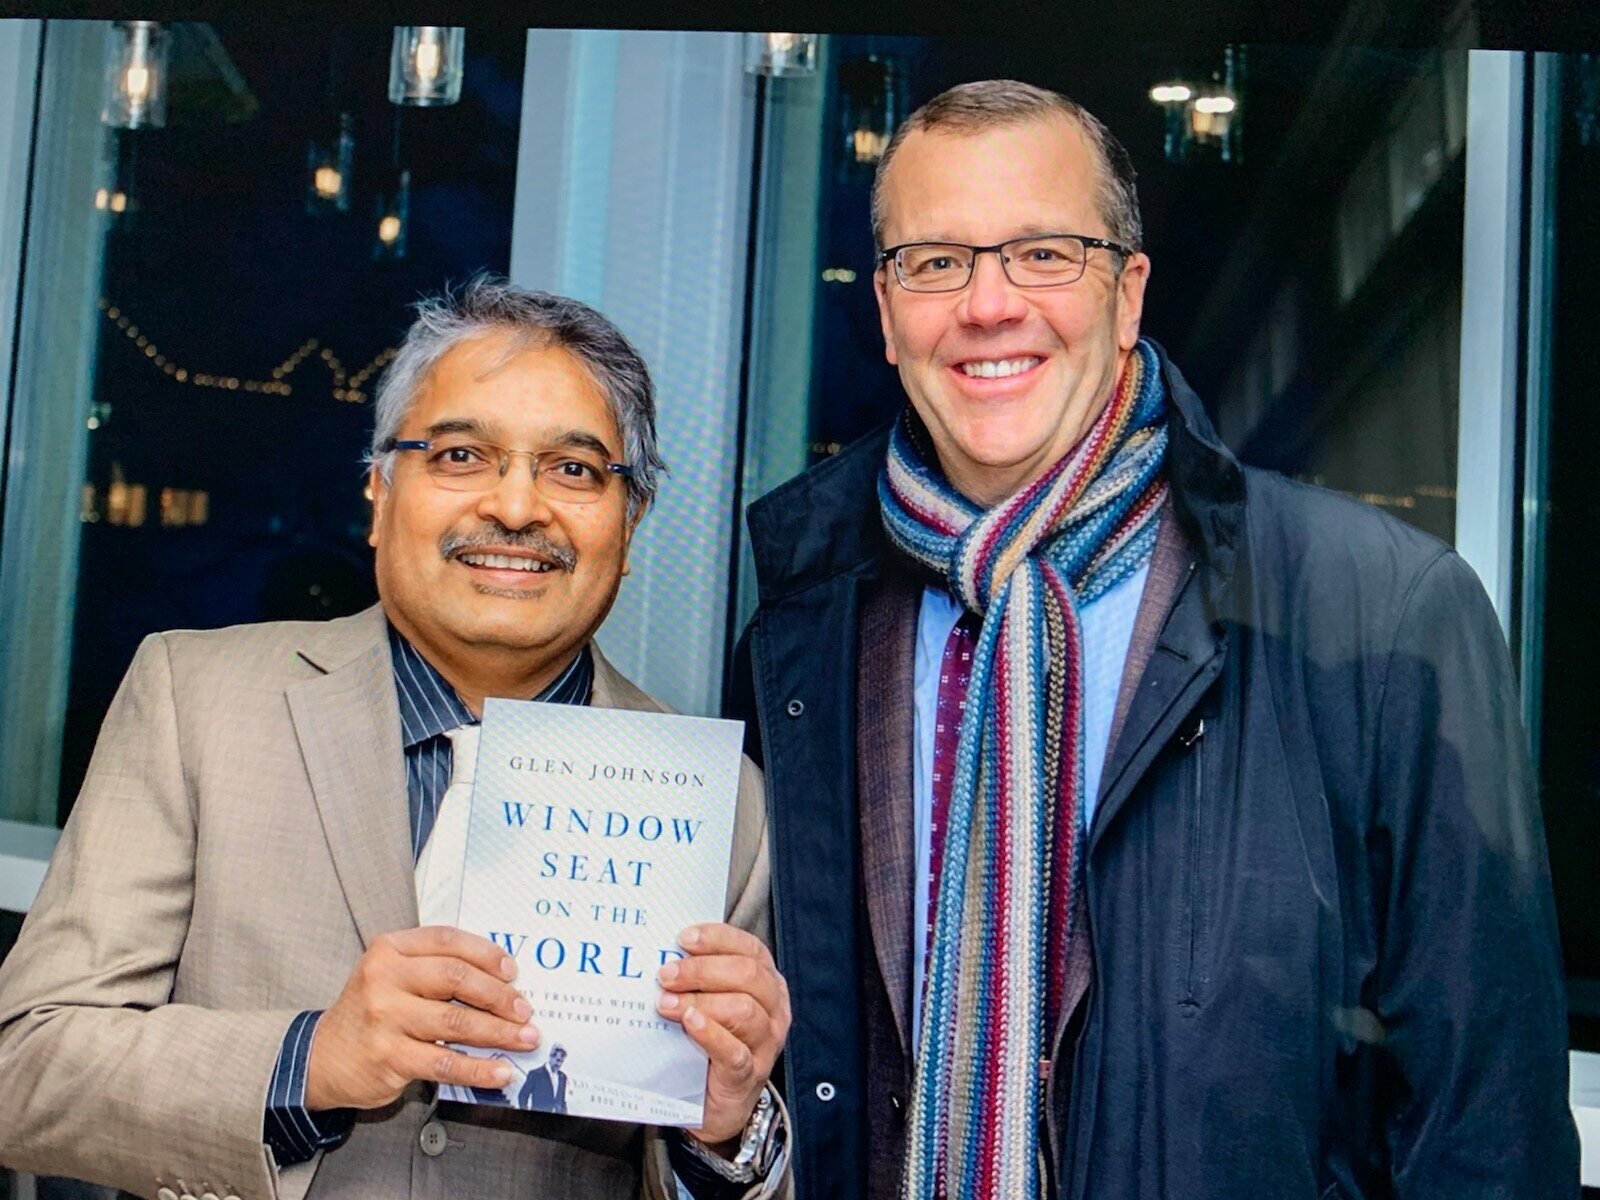  I gave a copy to my friend to mark the opening of The Treasury, his new Indian restaurant in Burlington, Mass. 